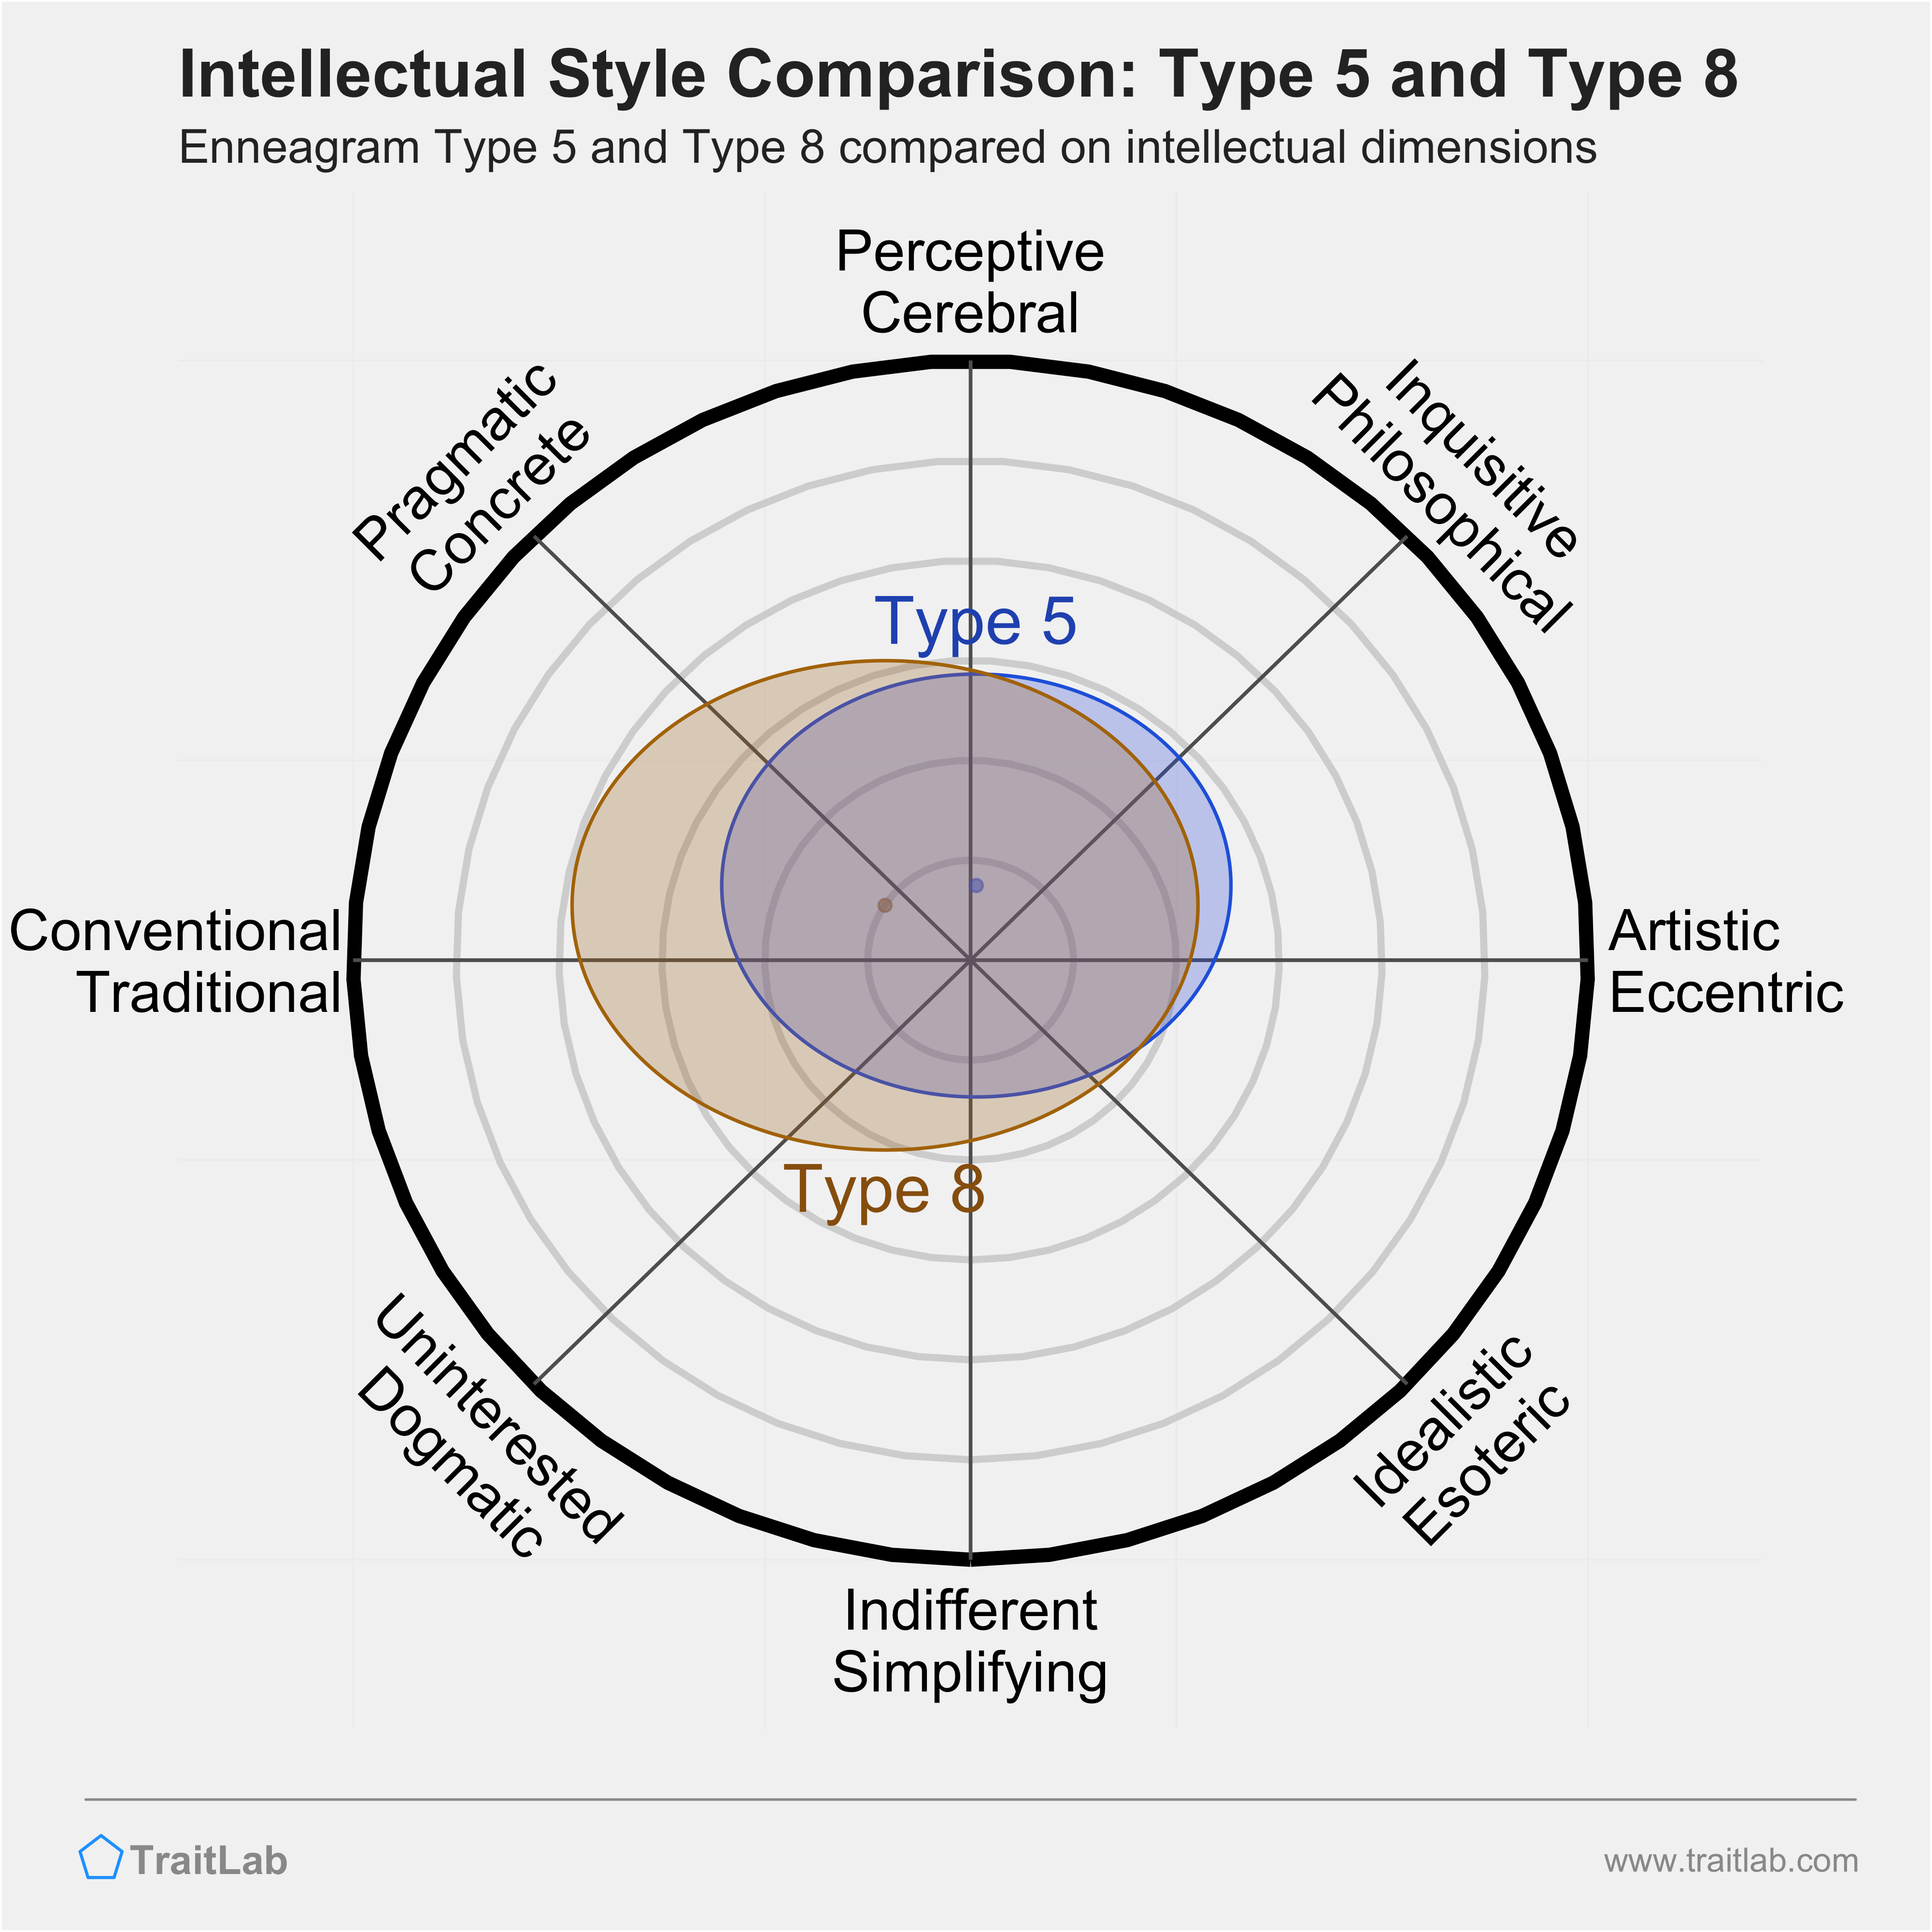 Type 5 and Type 8 comparison across intellectual dimensions